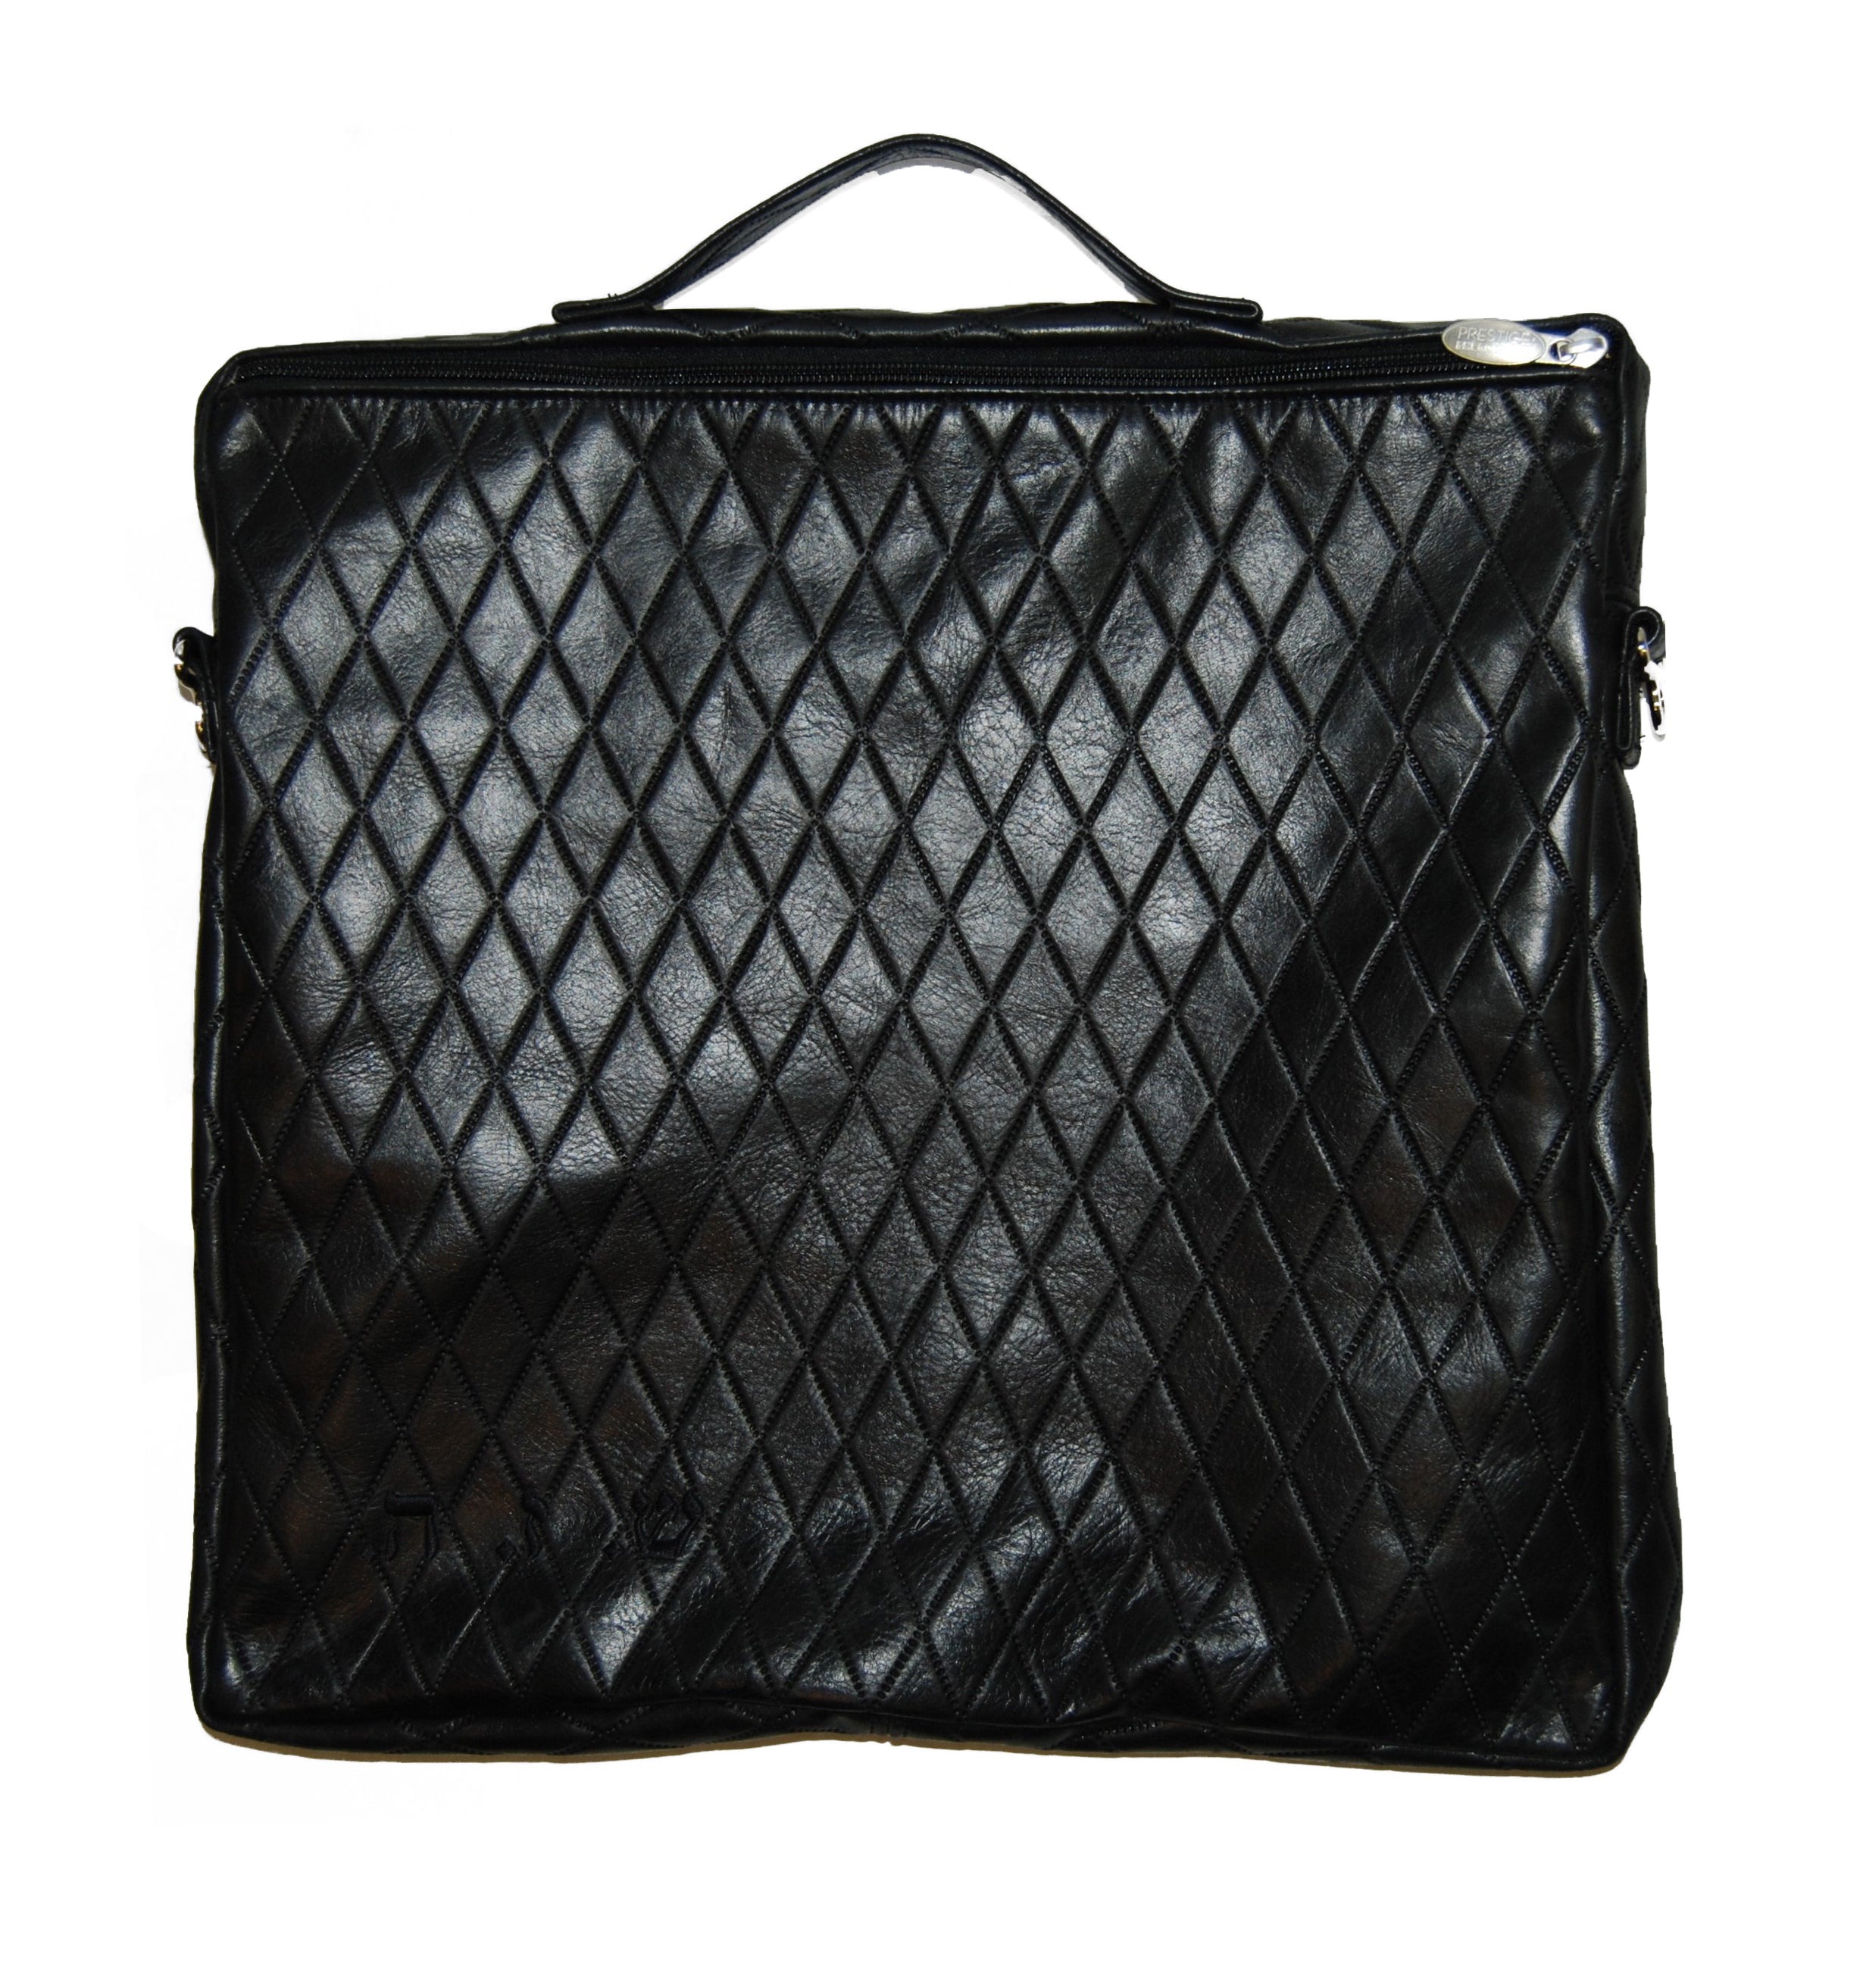 Xl large size man bag with side gusset and top flat zipper.